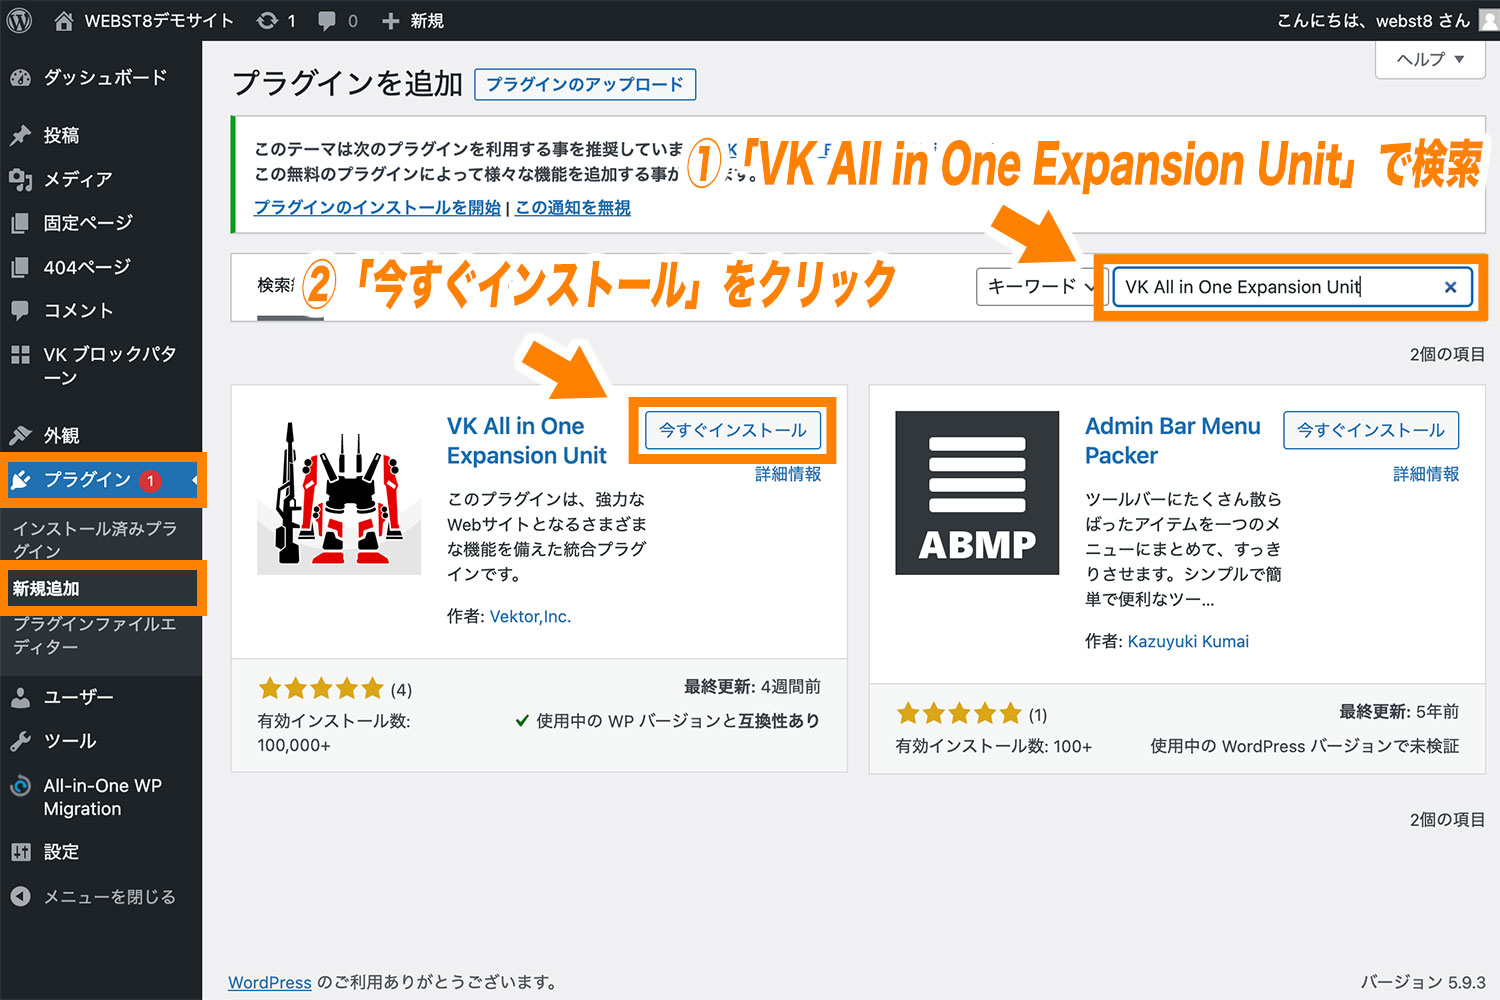 「VK All in One Expansion Unit」と検索し、「今すぐインストール」をクリック